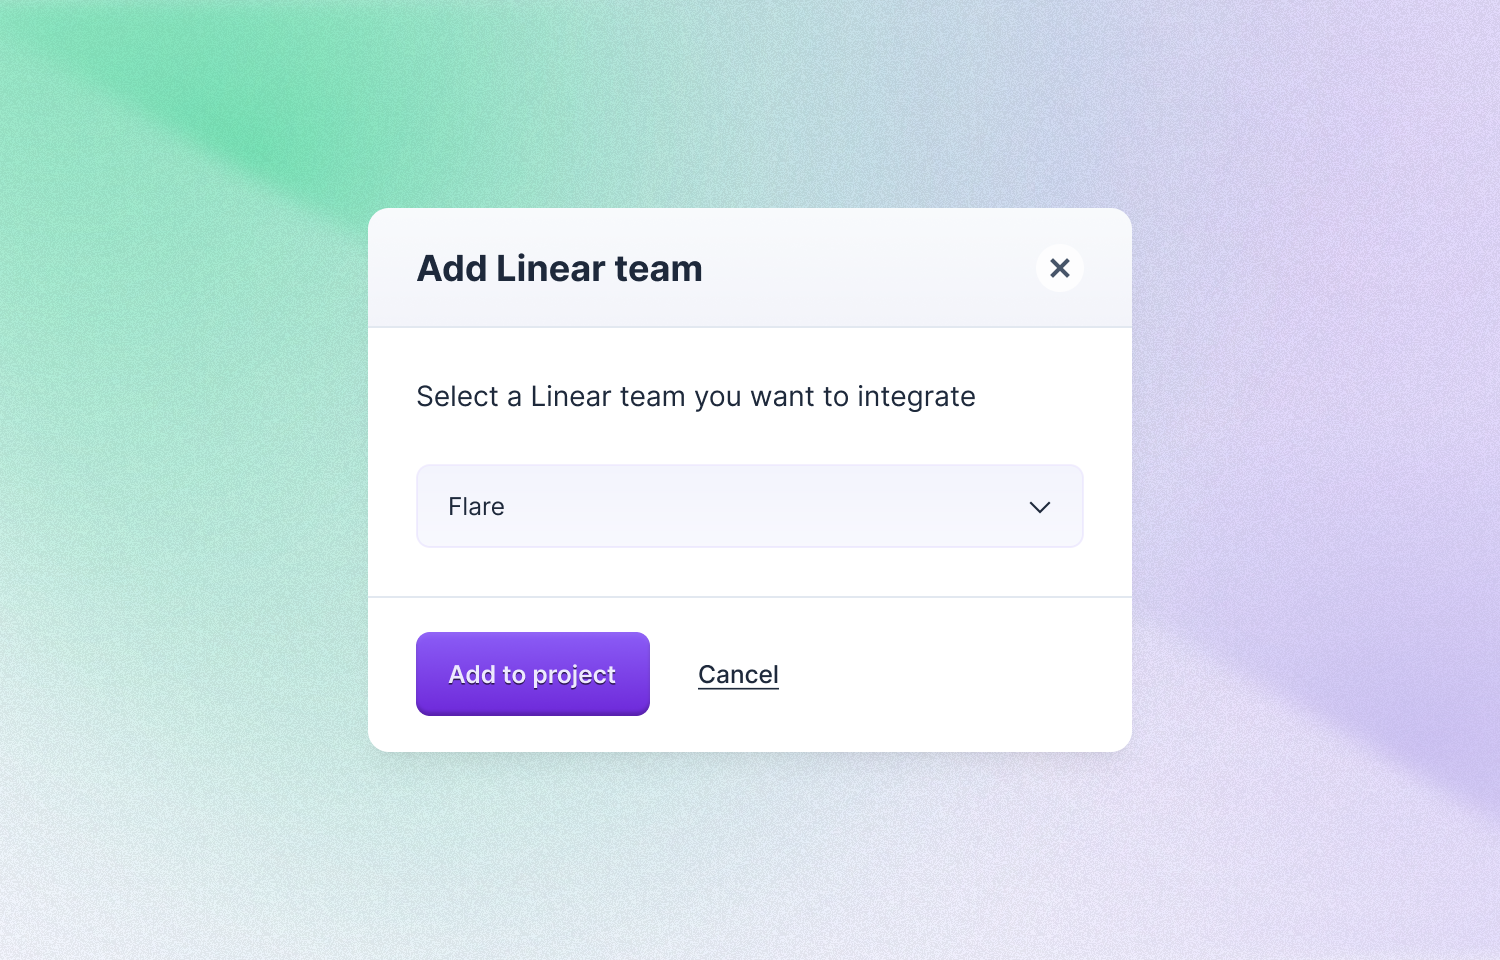 Adding a Linear team in Flare